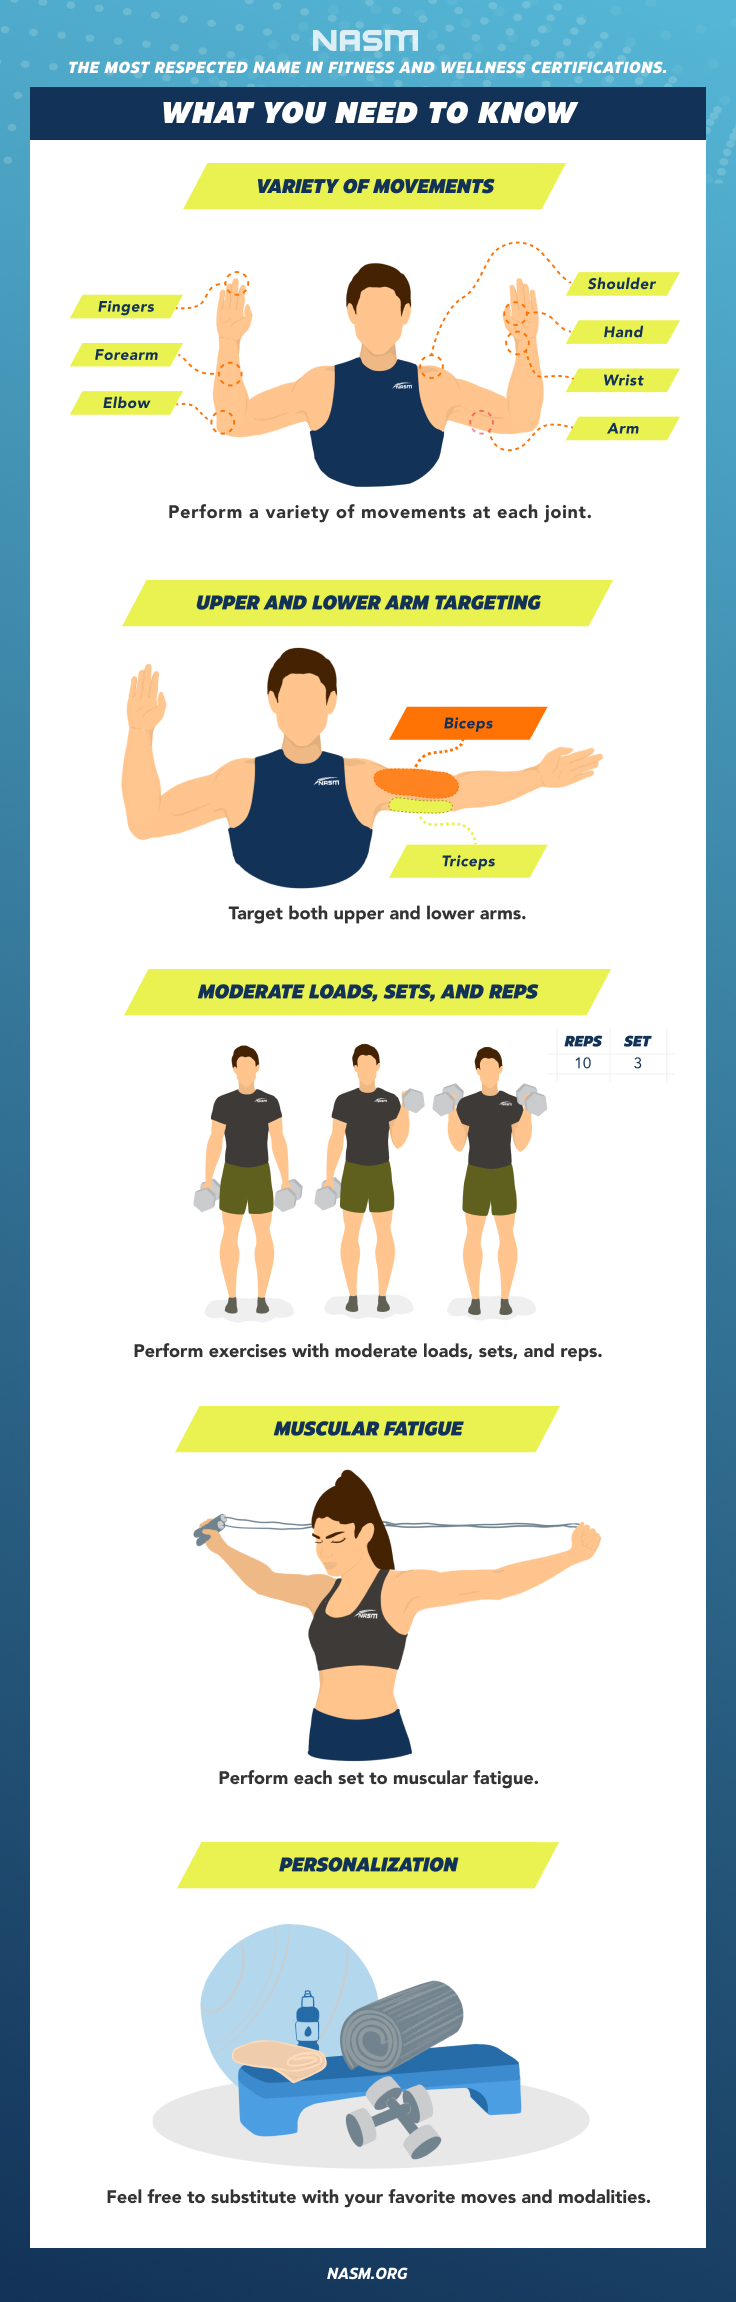 NA_ What You Need to Know_ Arm Workout Tips Infographic JPEG.III